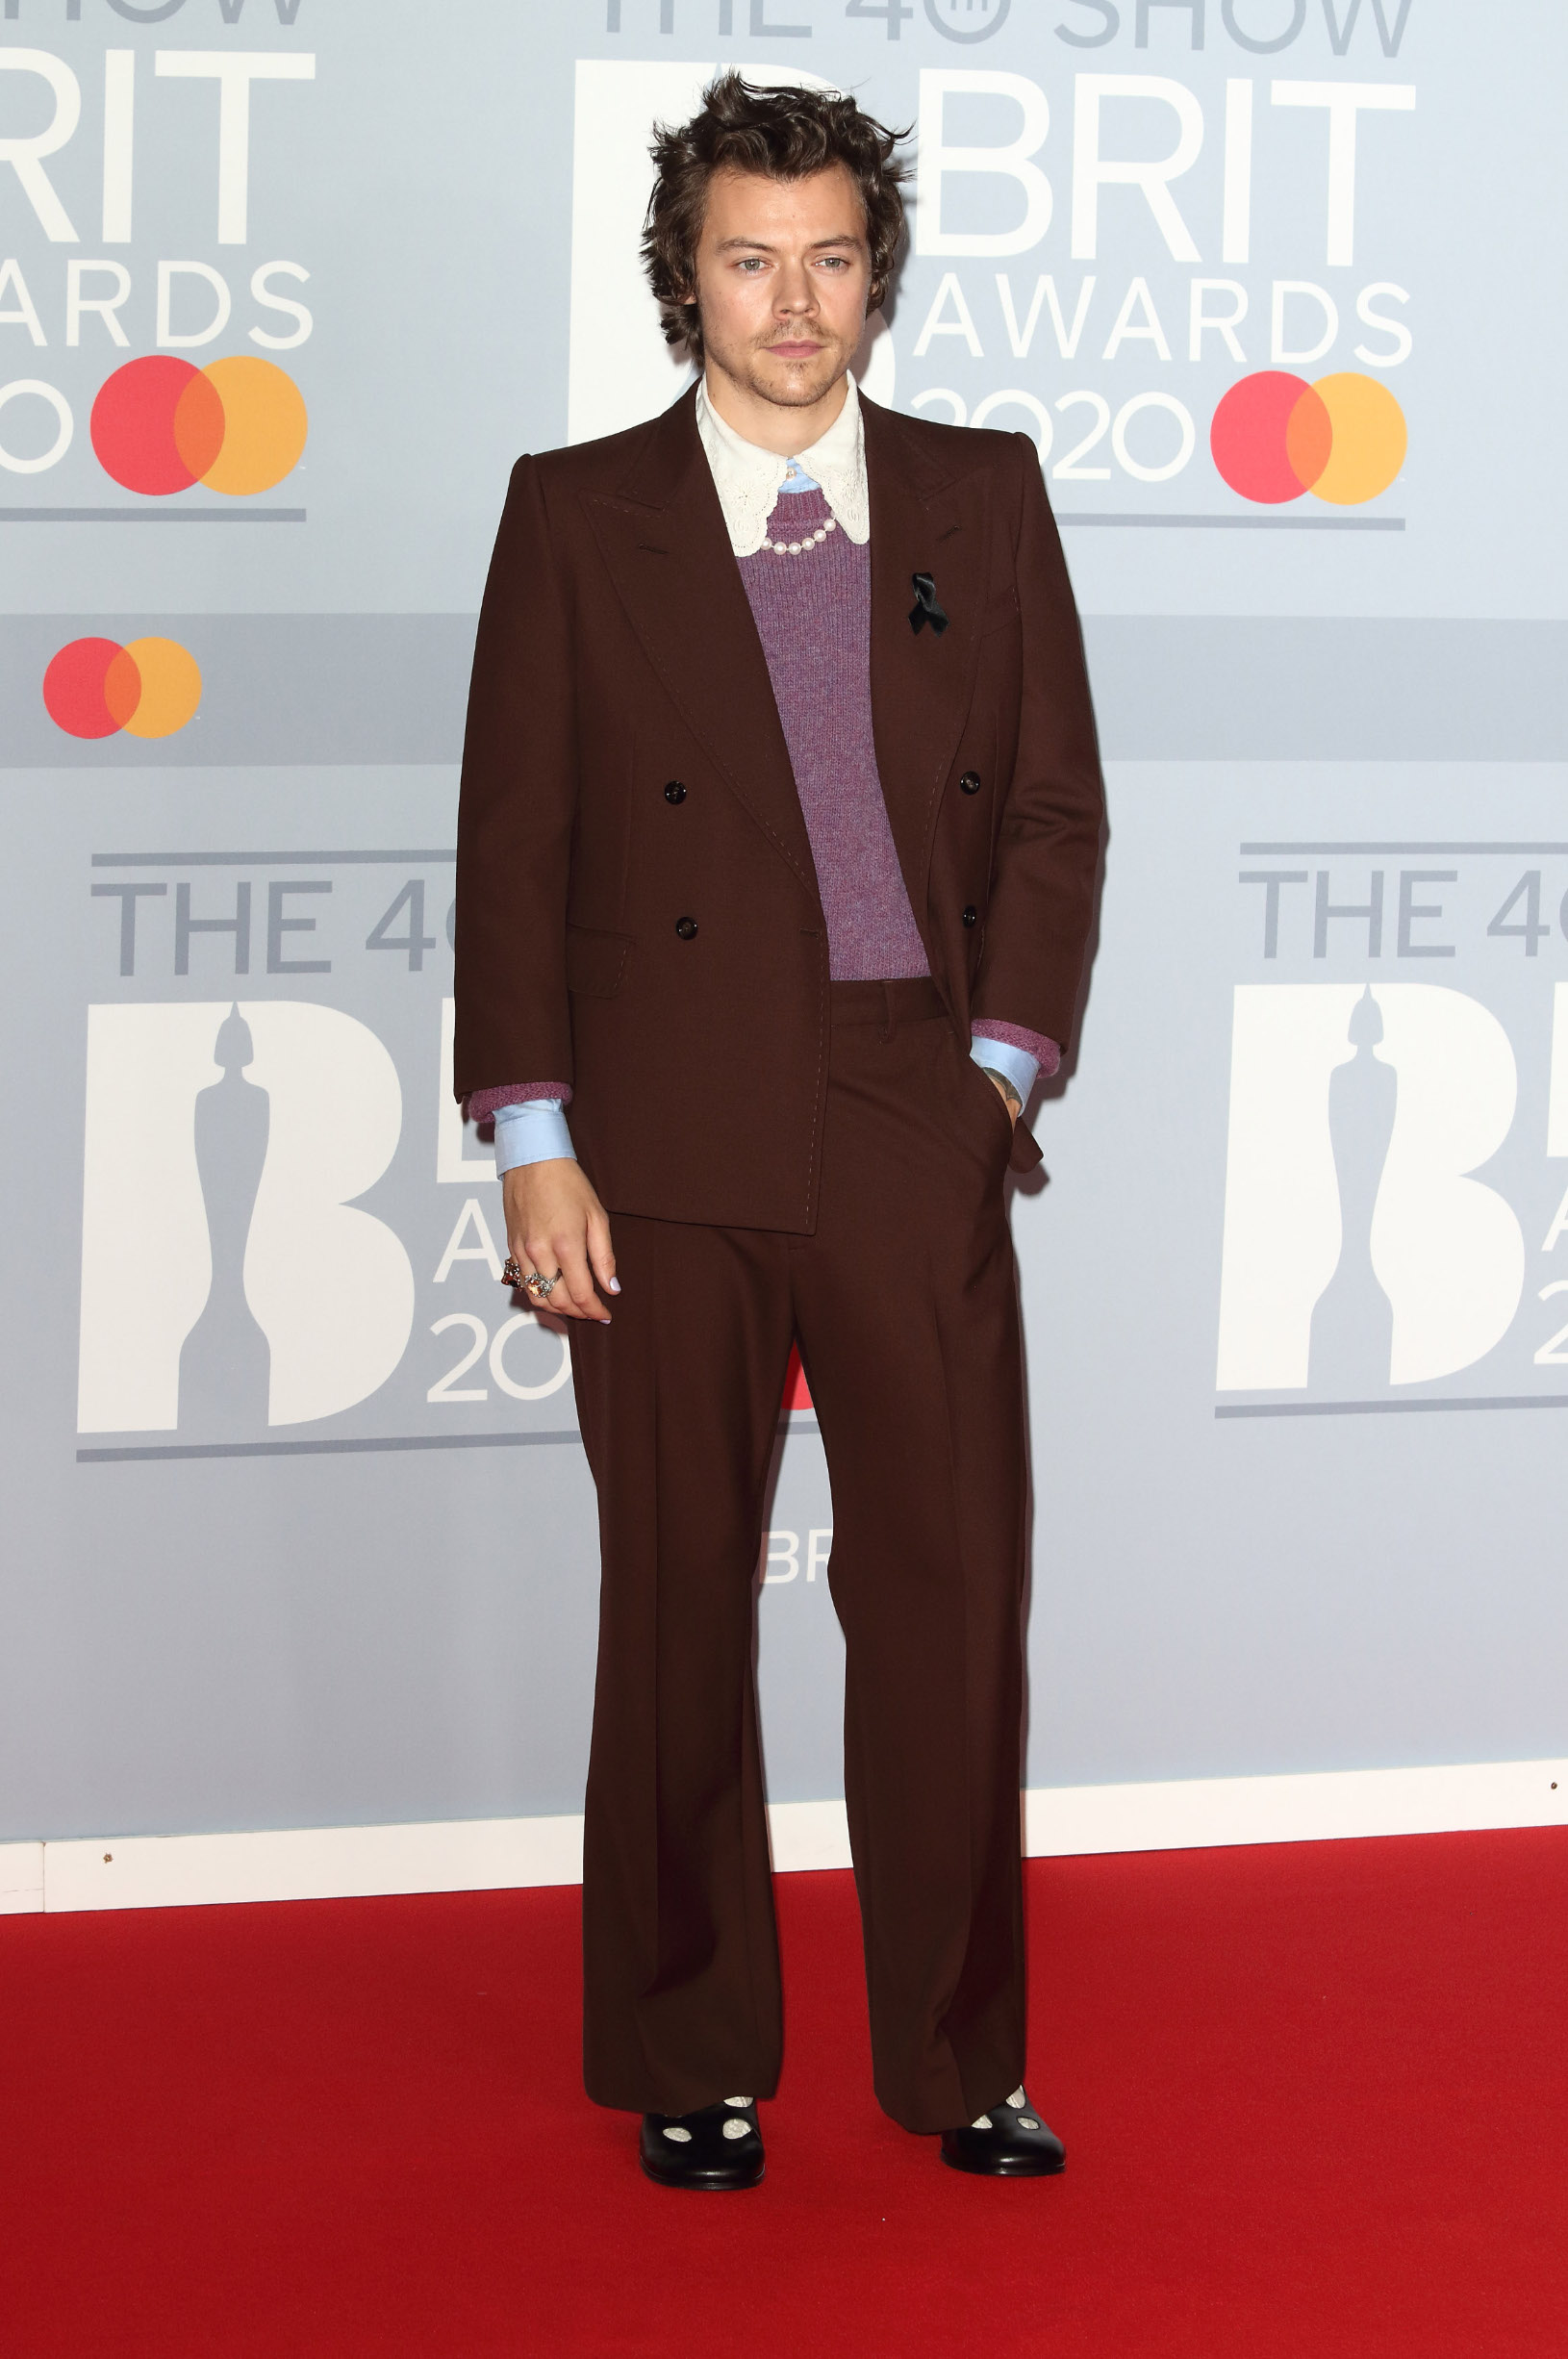 London.UK.   Harry Styles    at 
40th Brit Awards Red Carpet arrivals, The O2 Arena, London. 19th February 2020.,Image: 499645873, License: Rights-managed, Restrictions: WORLDWIDE RIGHTS, Model Release: no, Credit line: Keith Mayhew / Landmark / Profimedia